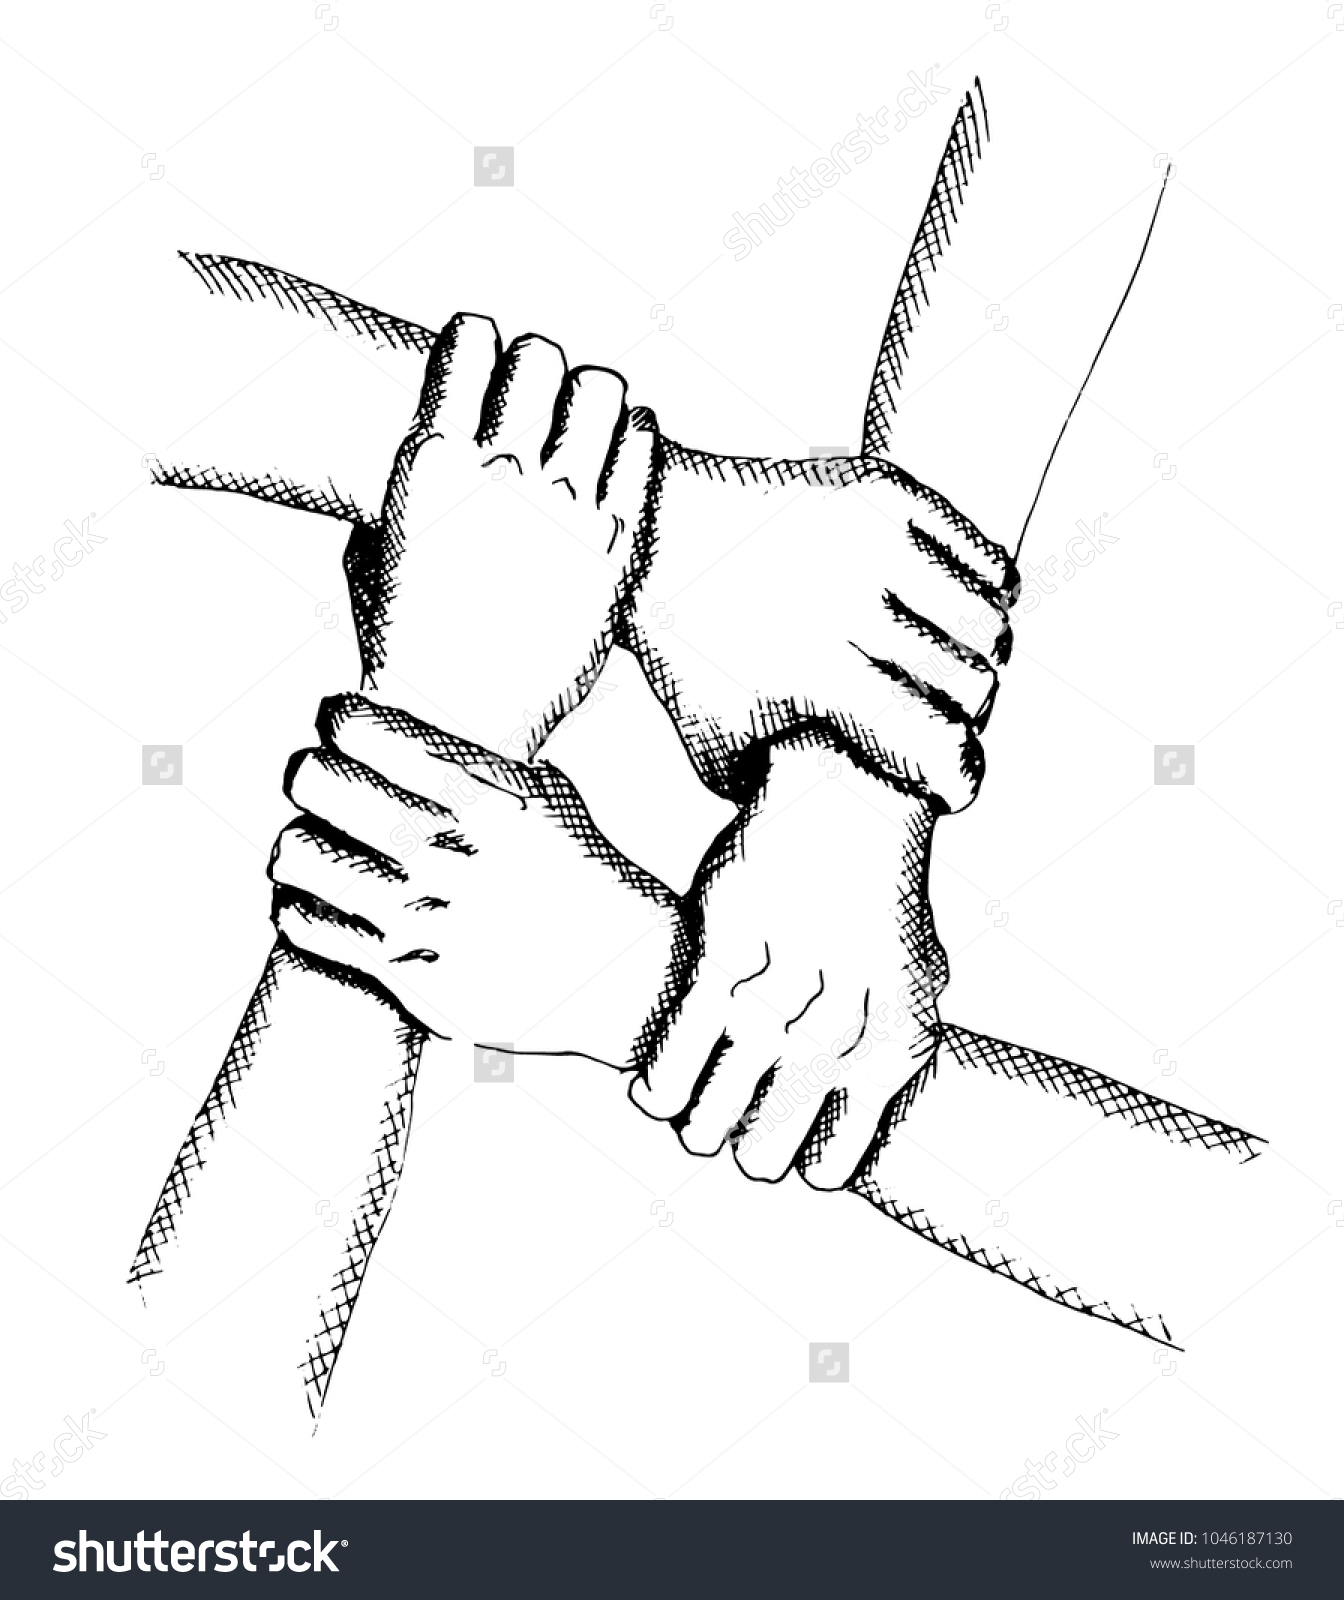 Albums 91+ Wallpaper Two Hands Holding Each Other Superb